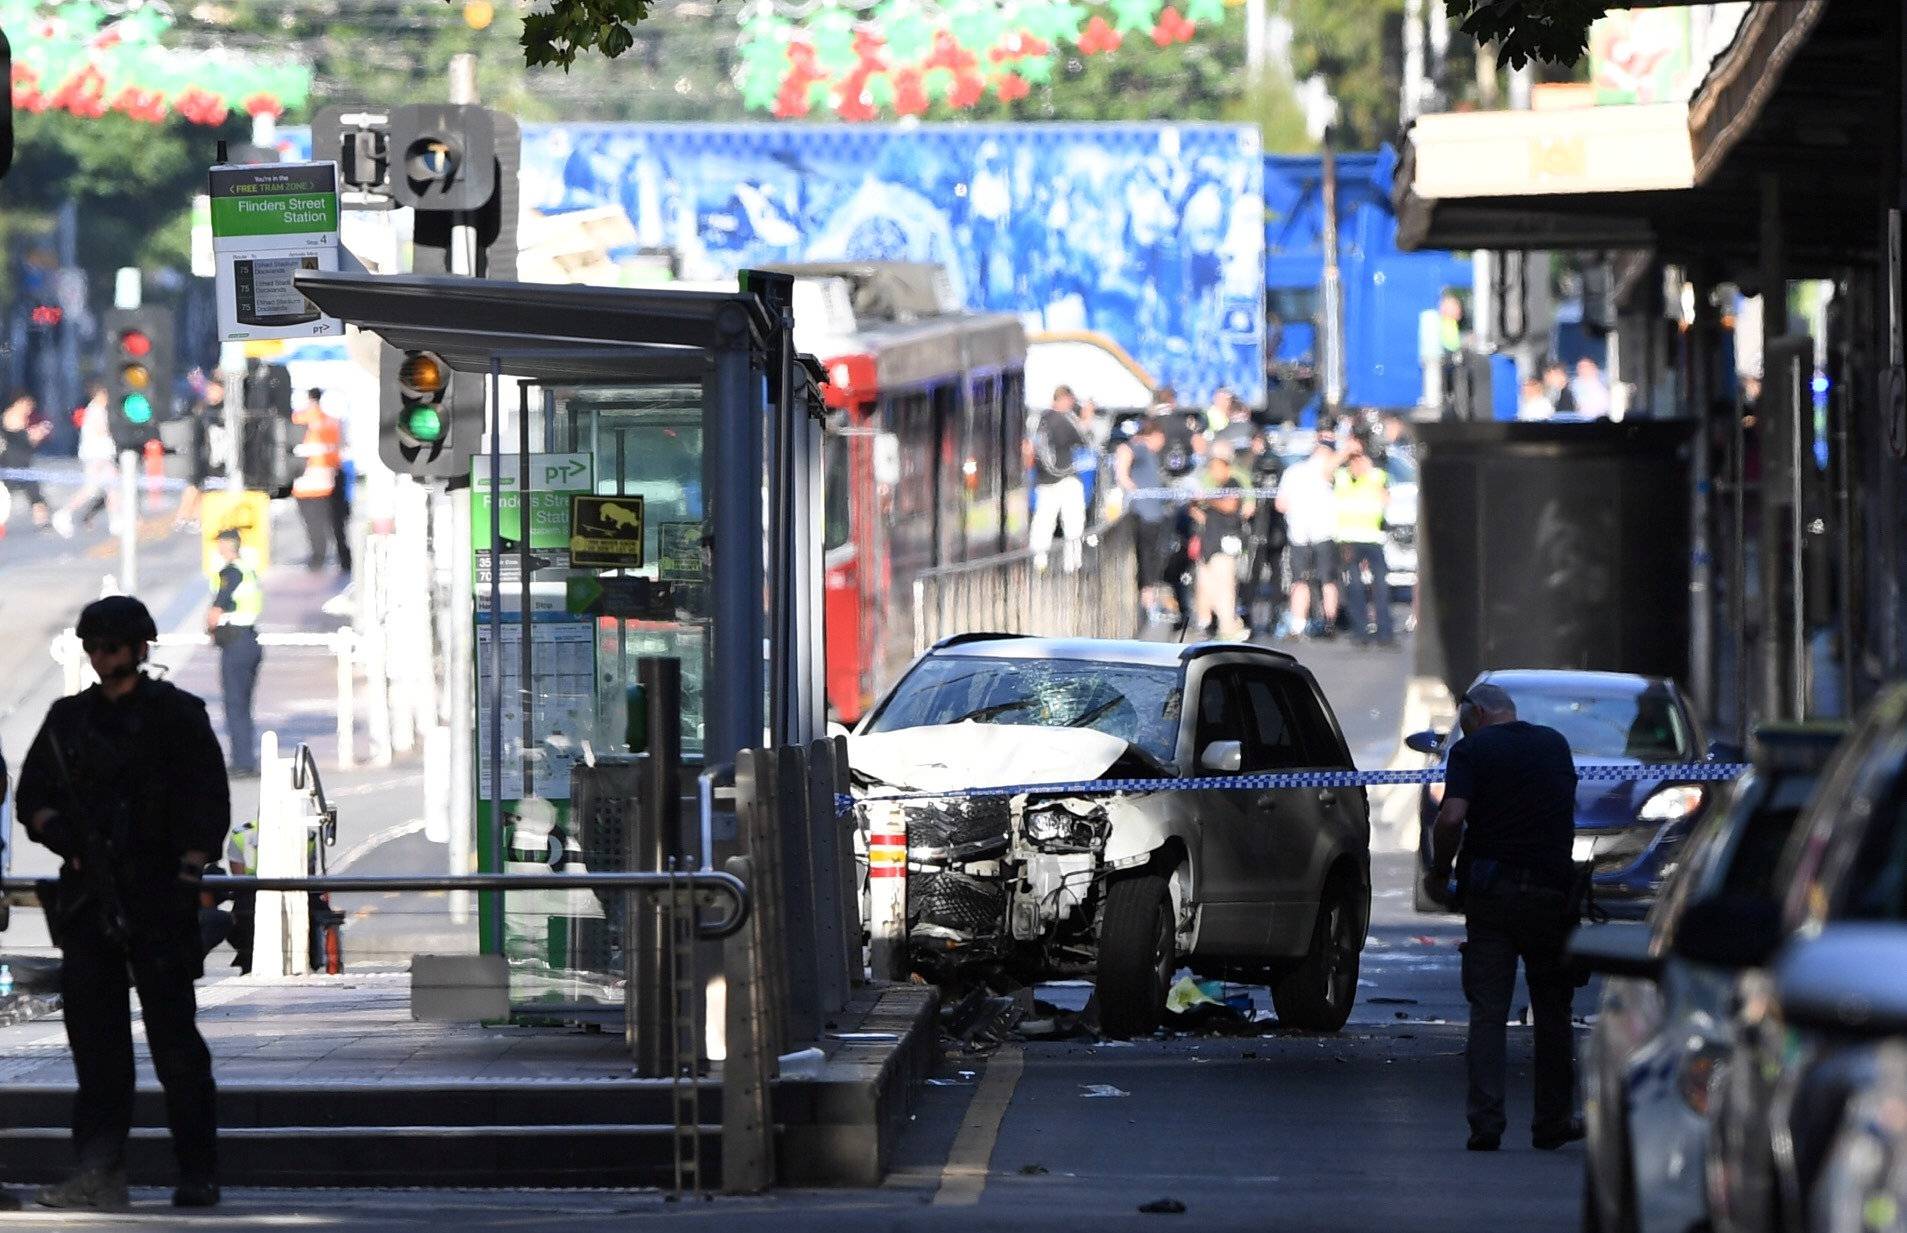 Damaged vehicle is seen at the scene of an incident on Flinders Street, in Melbourne